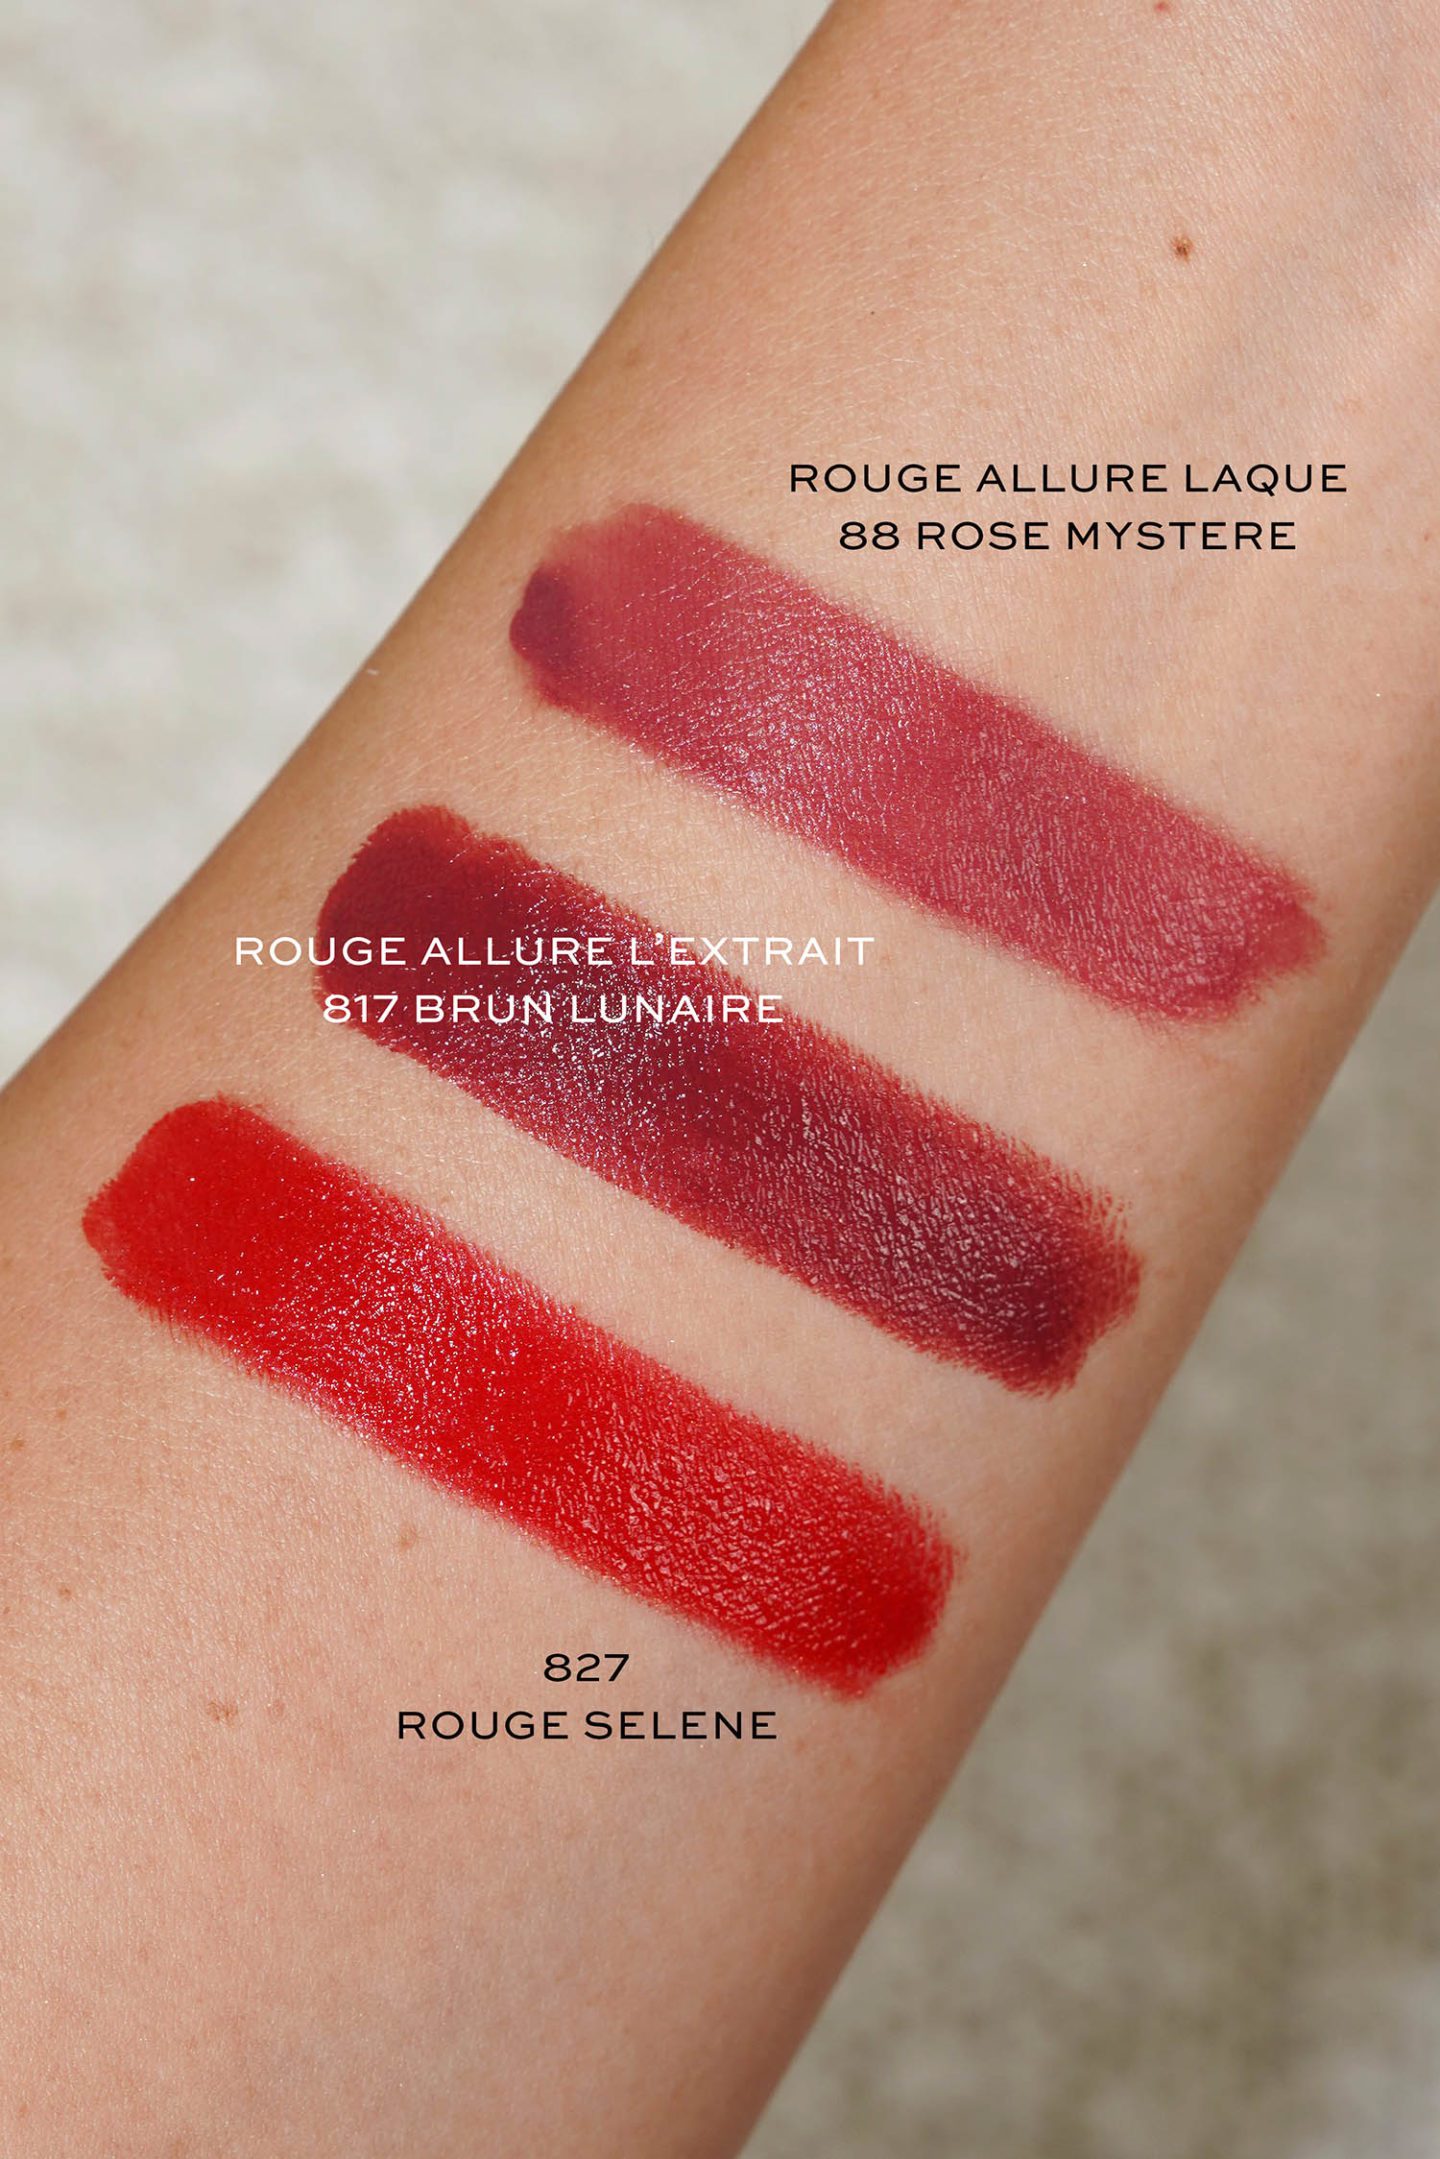 Chanel Holiday 2022 Lip colors